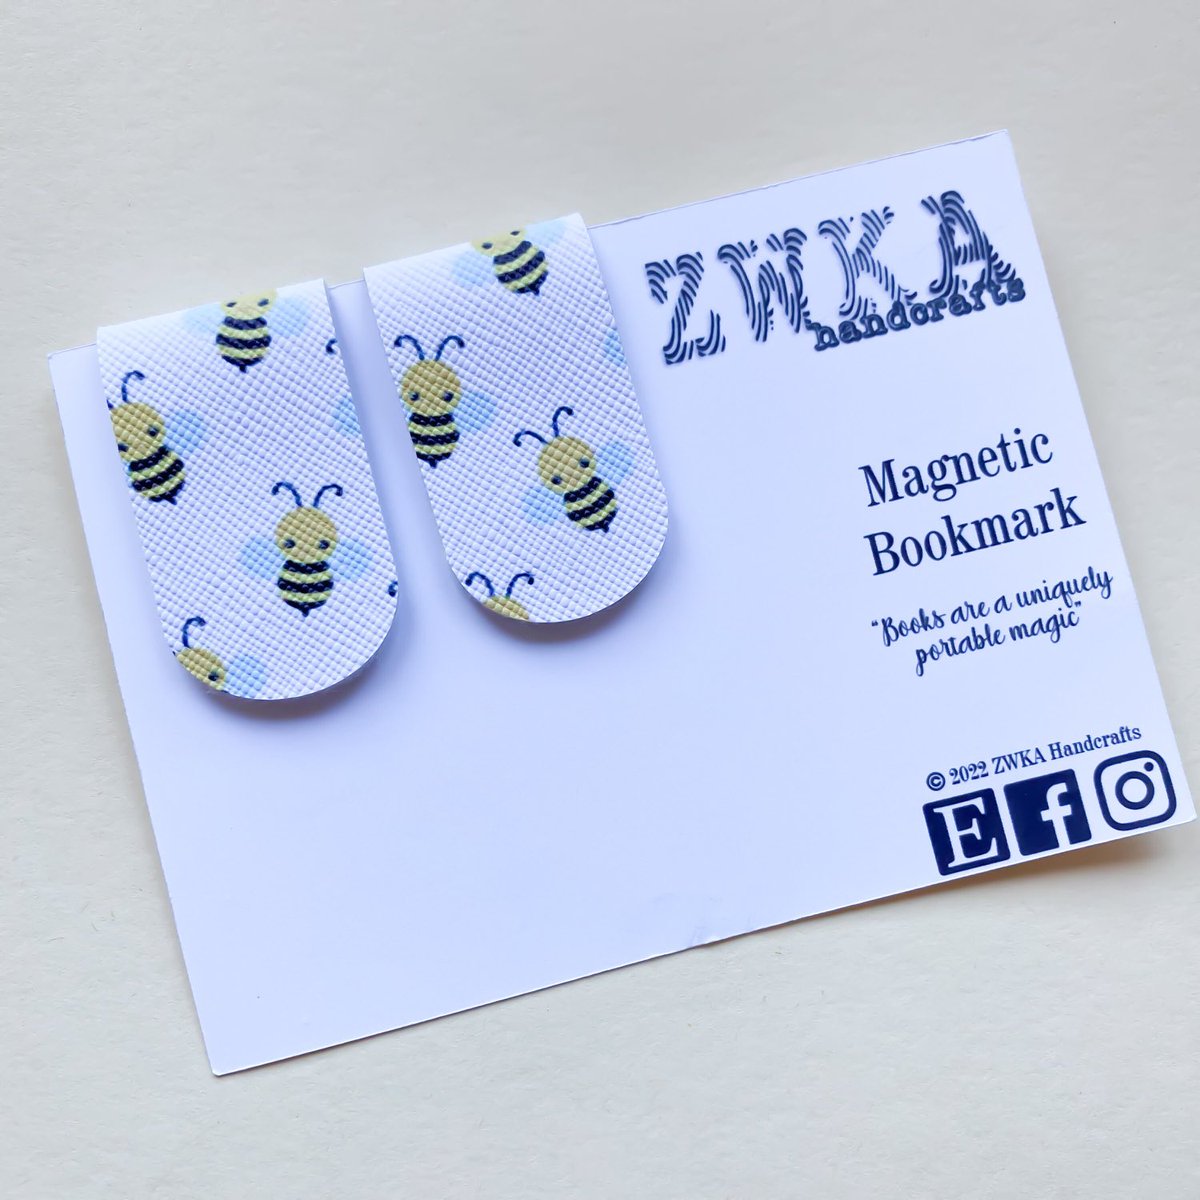 Just one left in stock of these Bumble Bee Magnetic Bookmarks 🐝 #mhhsbd #earlybiz